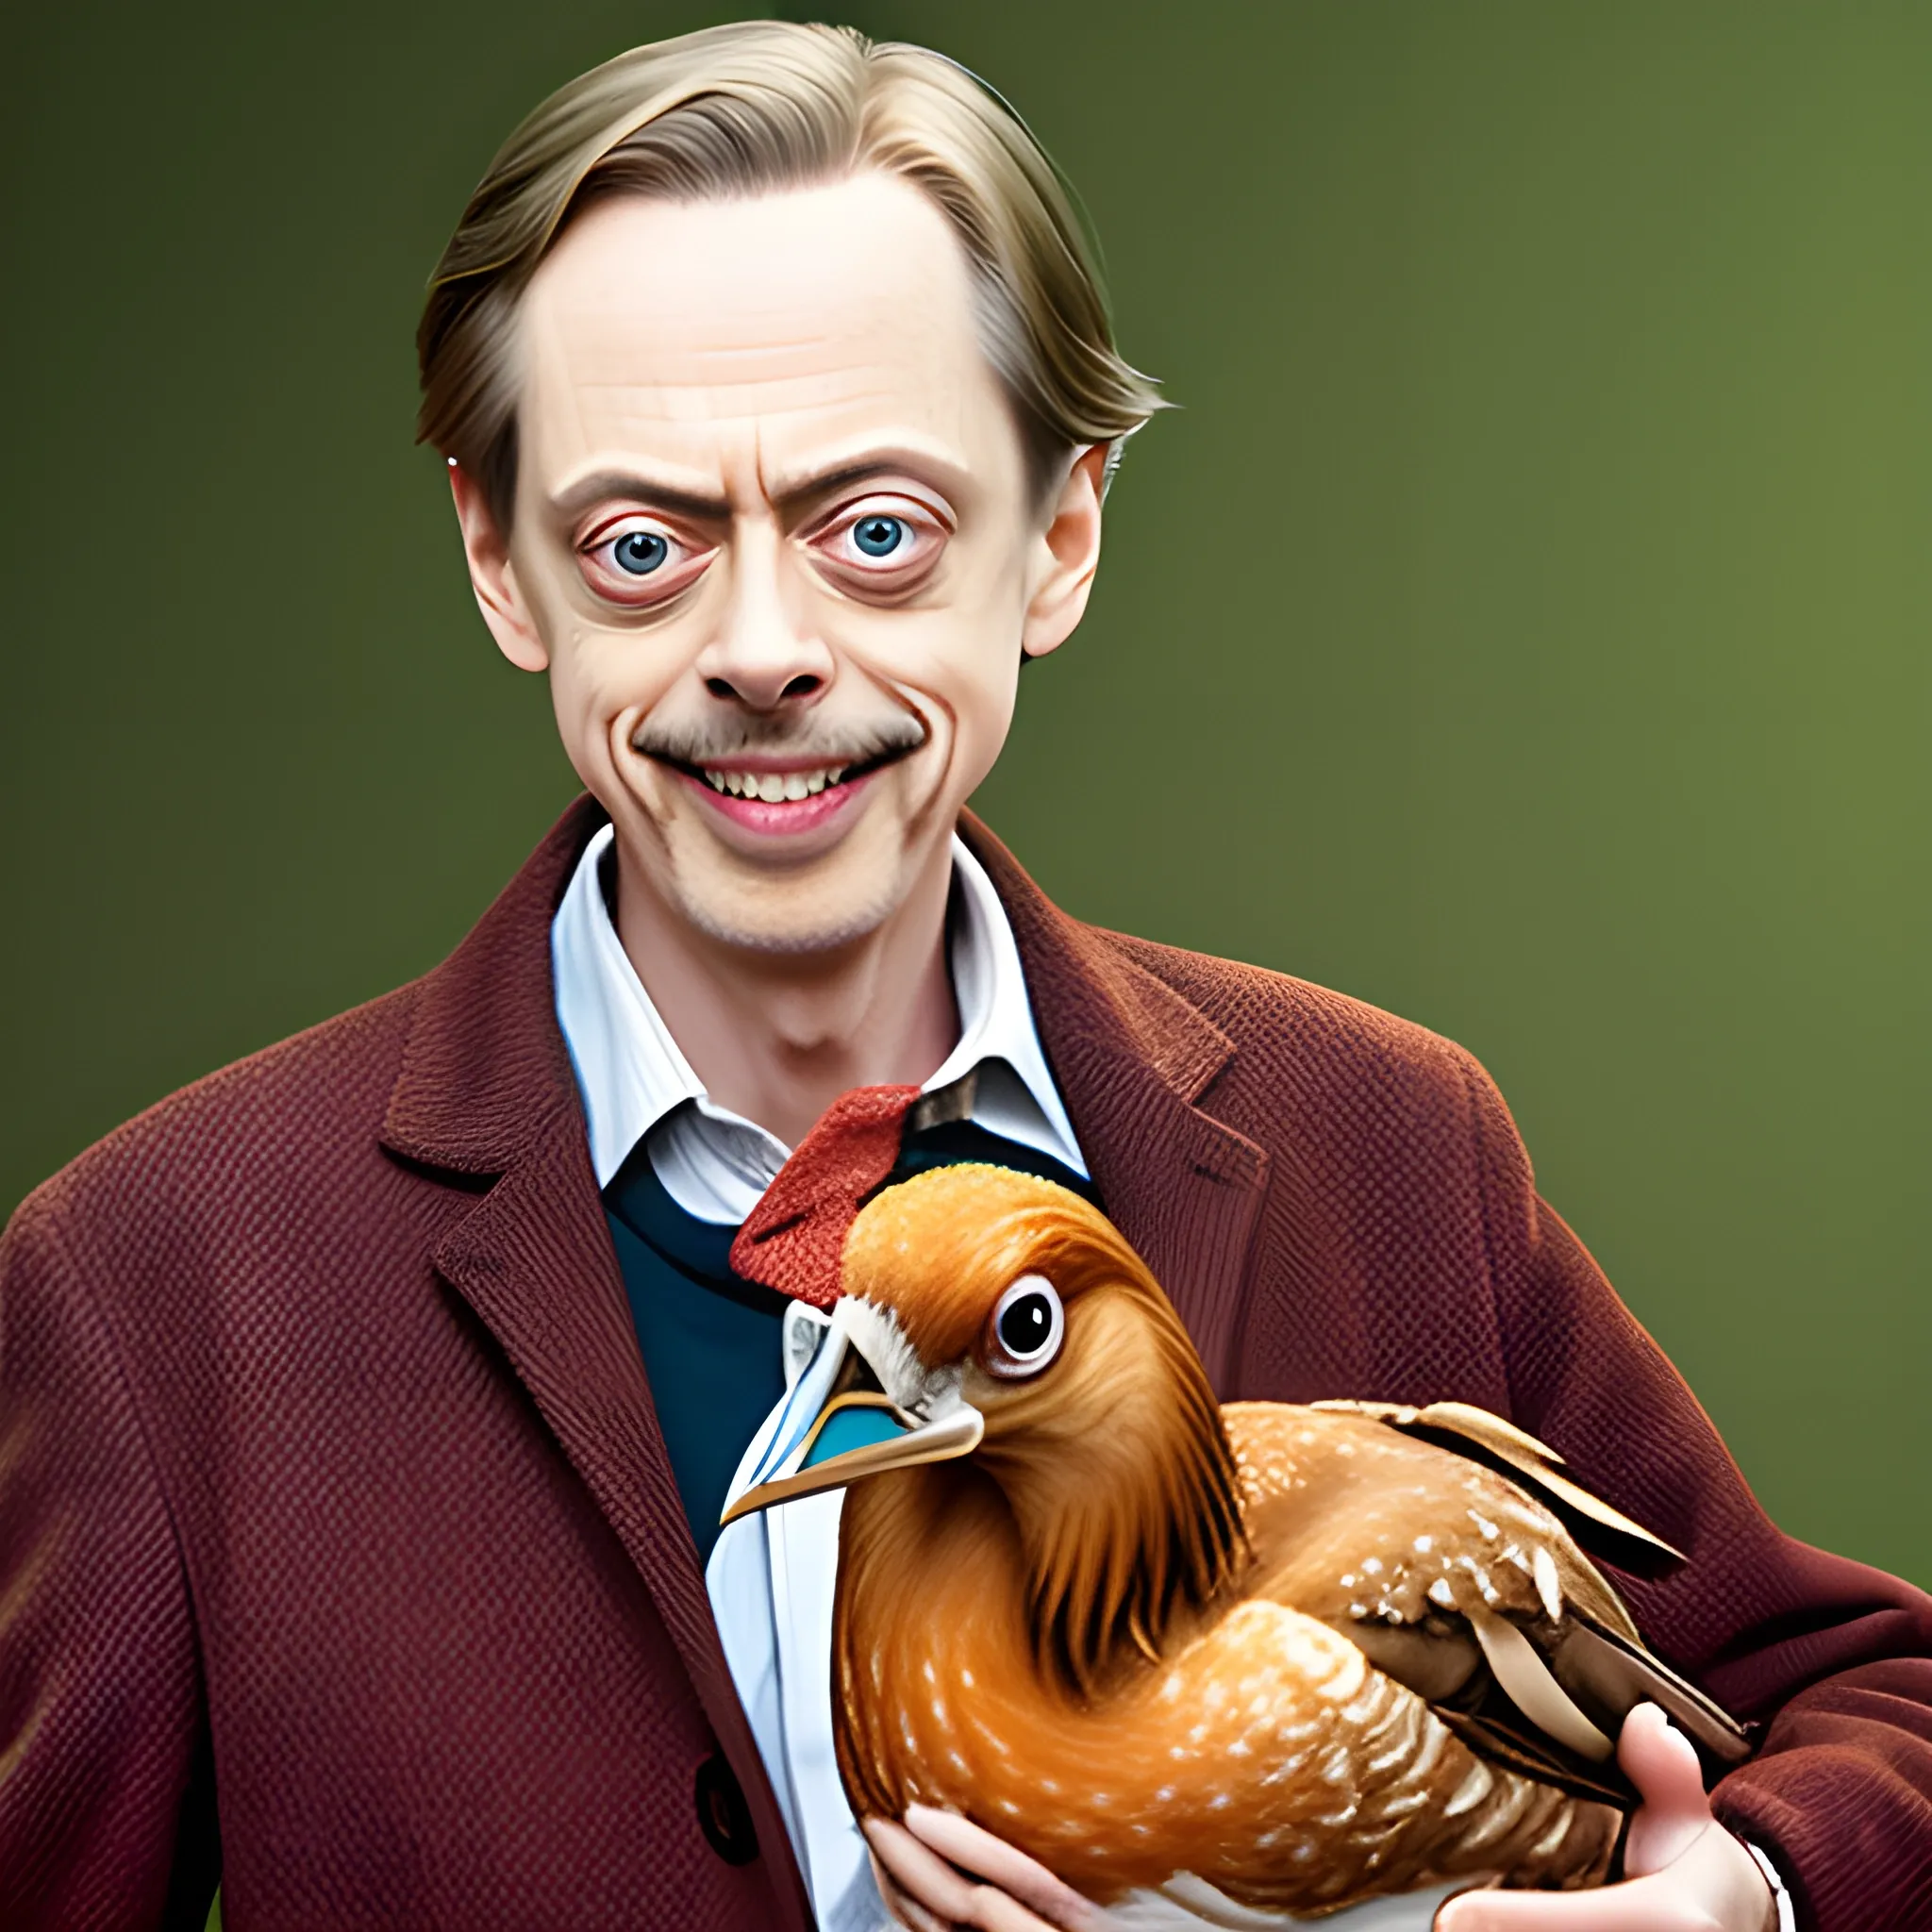 Steve Buscemi is holding a turkey by the neck, Steve Buscemi is laughing